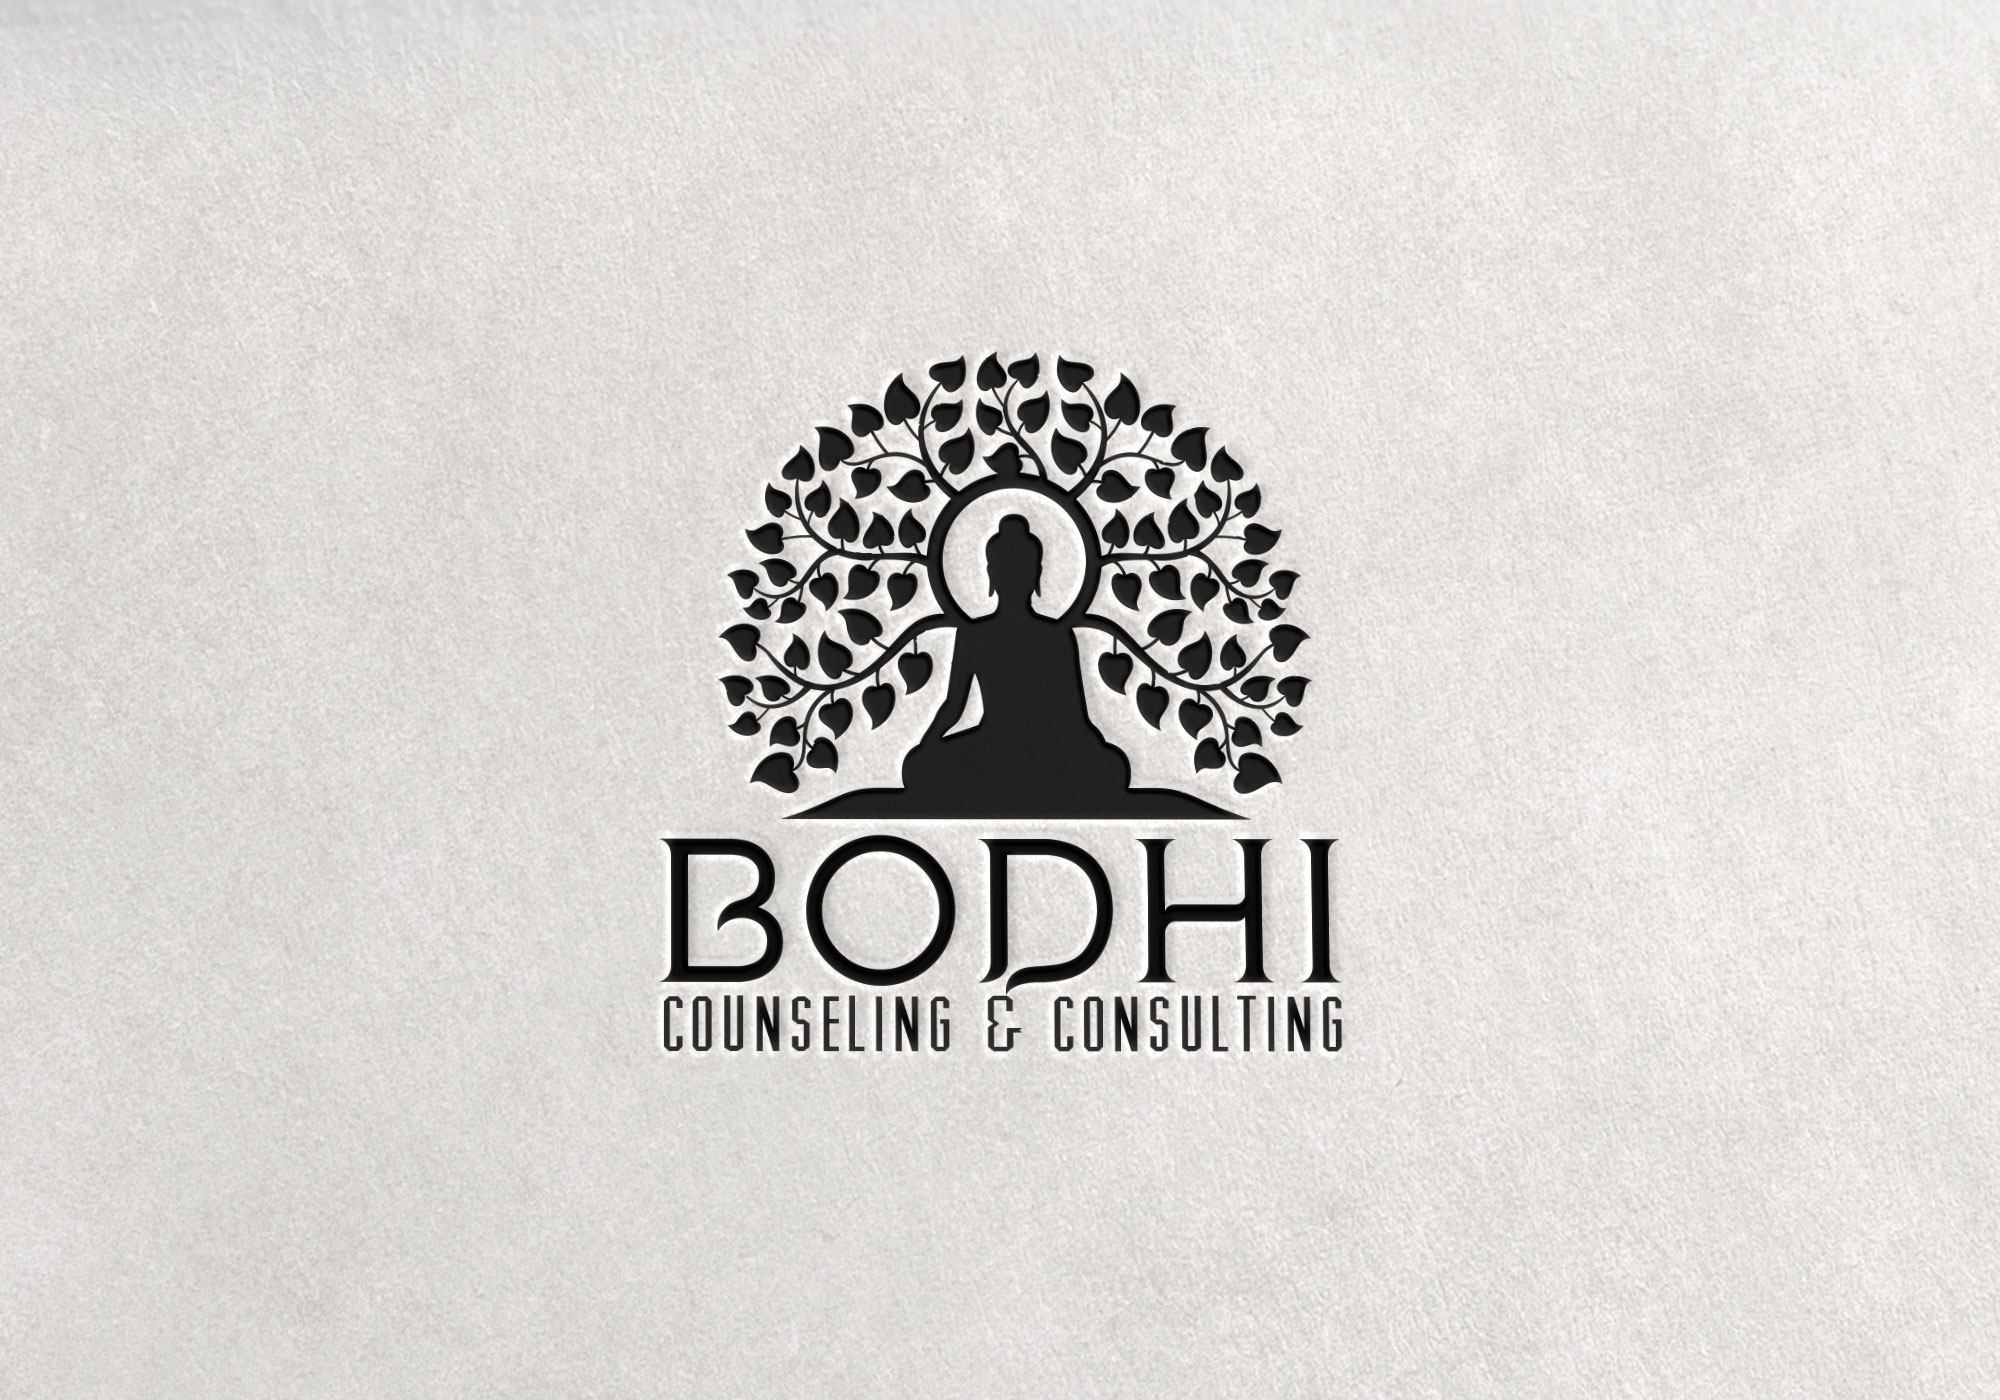 Bodhi Counseling and Consulting